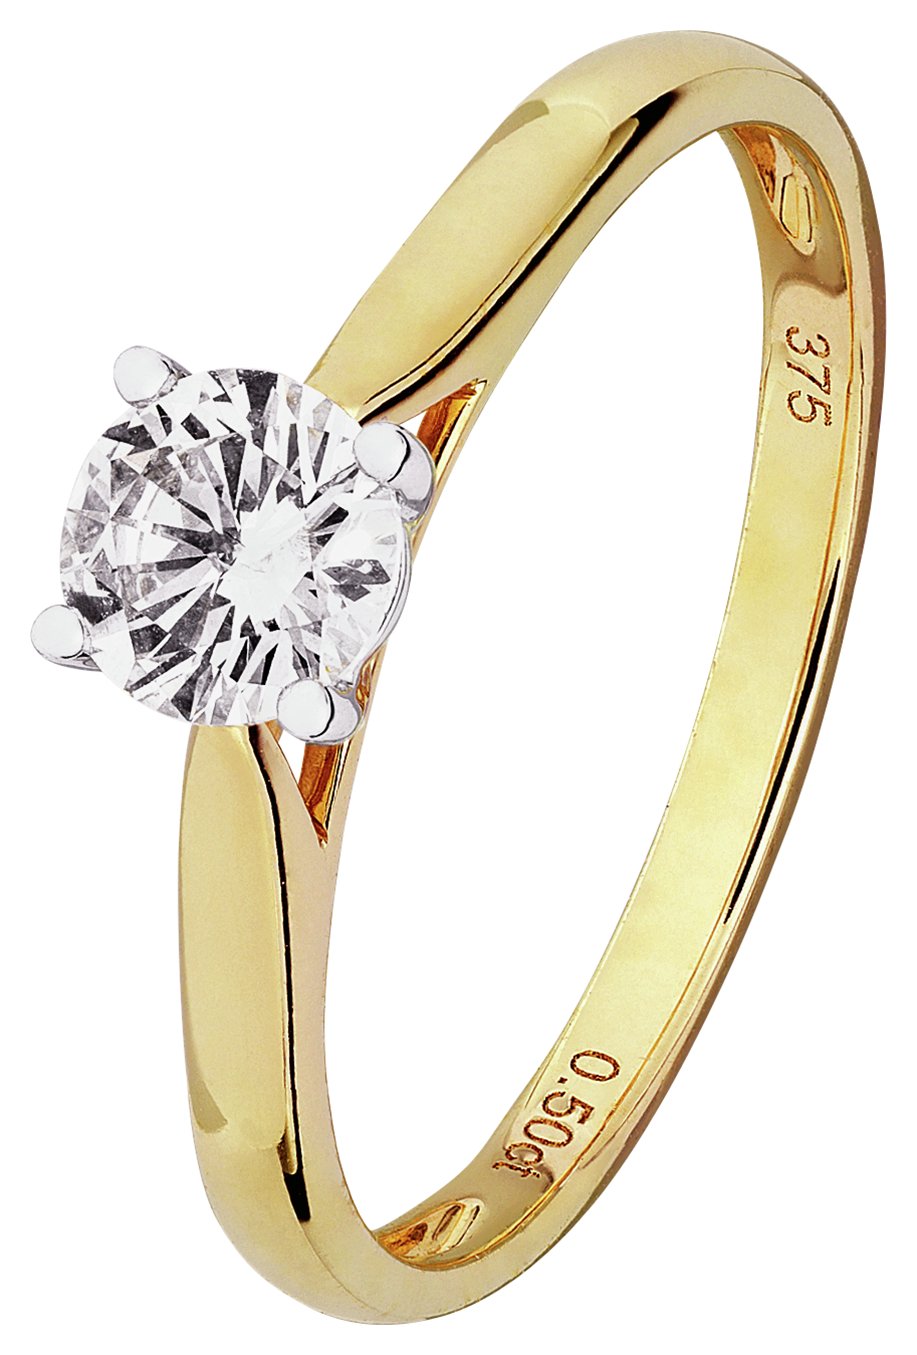 Revere 9ct Gold 0.50ct Diamond Soitaire Engagement Ring - J